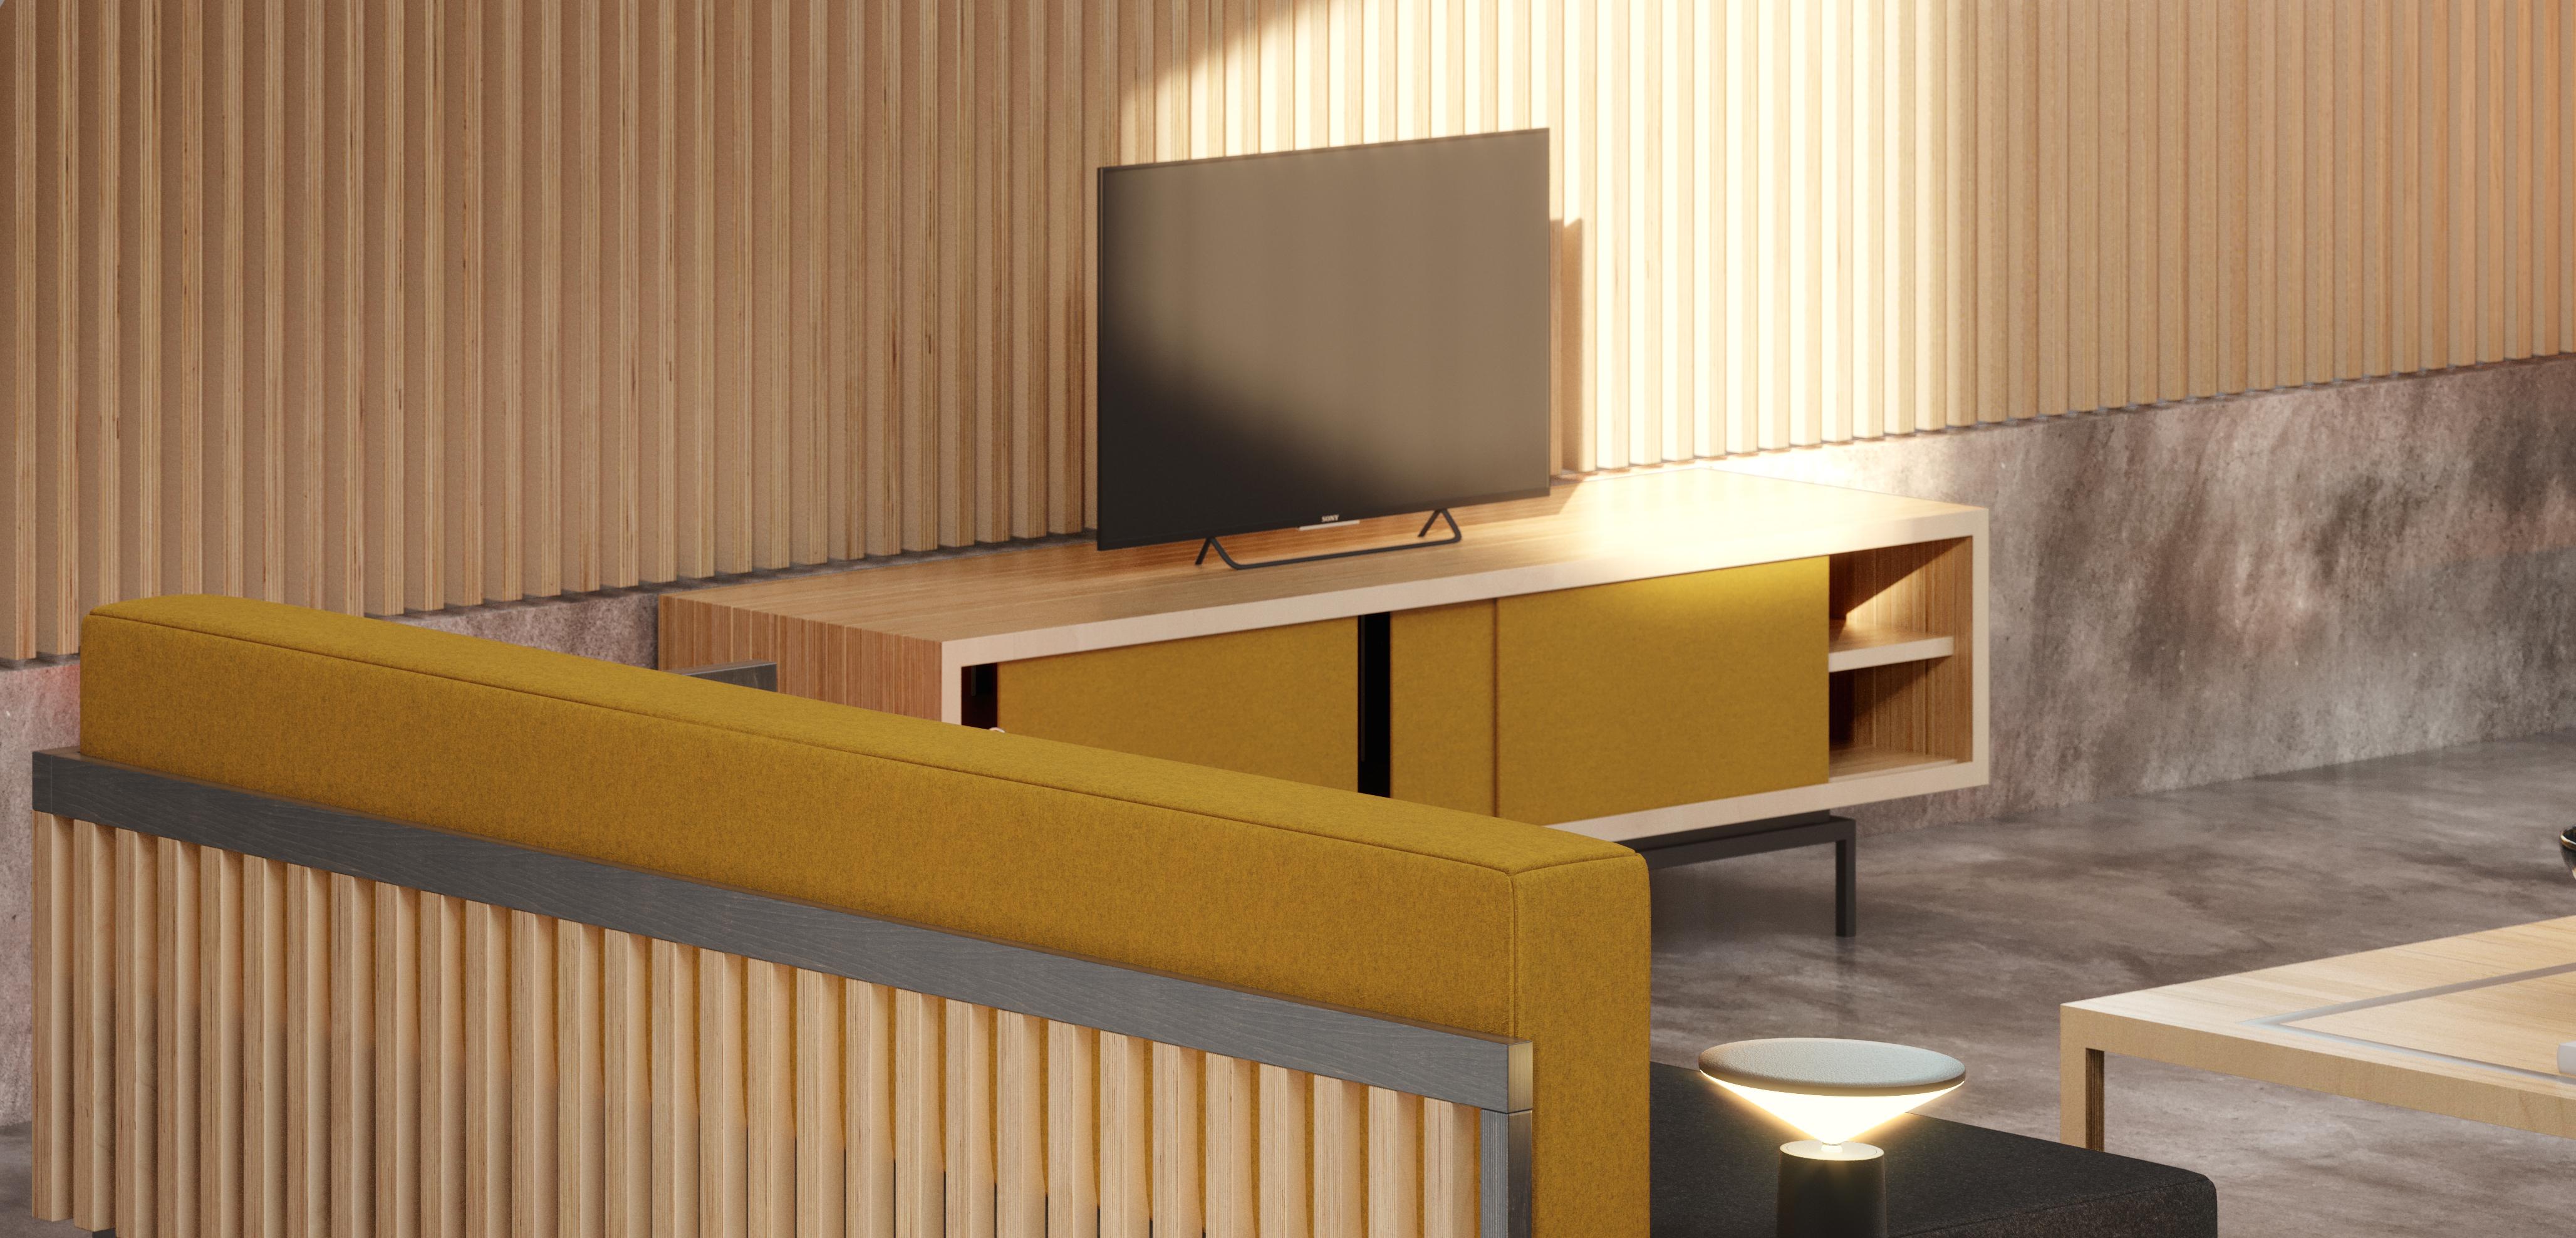 Its inspiration crosses all specters of Nordic culture and this exclusive Tv sideboard is an homage to one of the most influential filmmakers of all time. 

The minimalistic rectangular body and wooden slats on the back are beautifully complemented